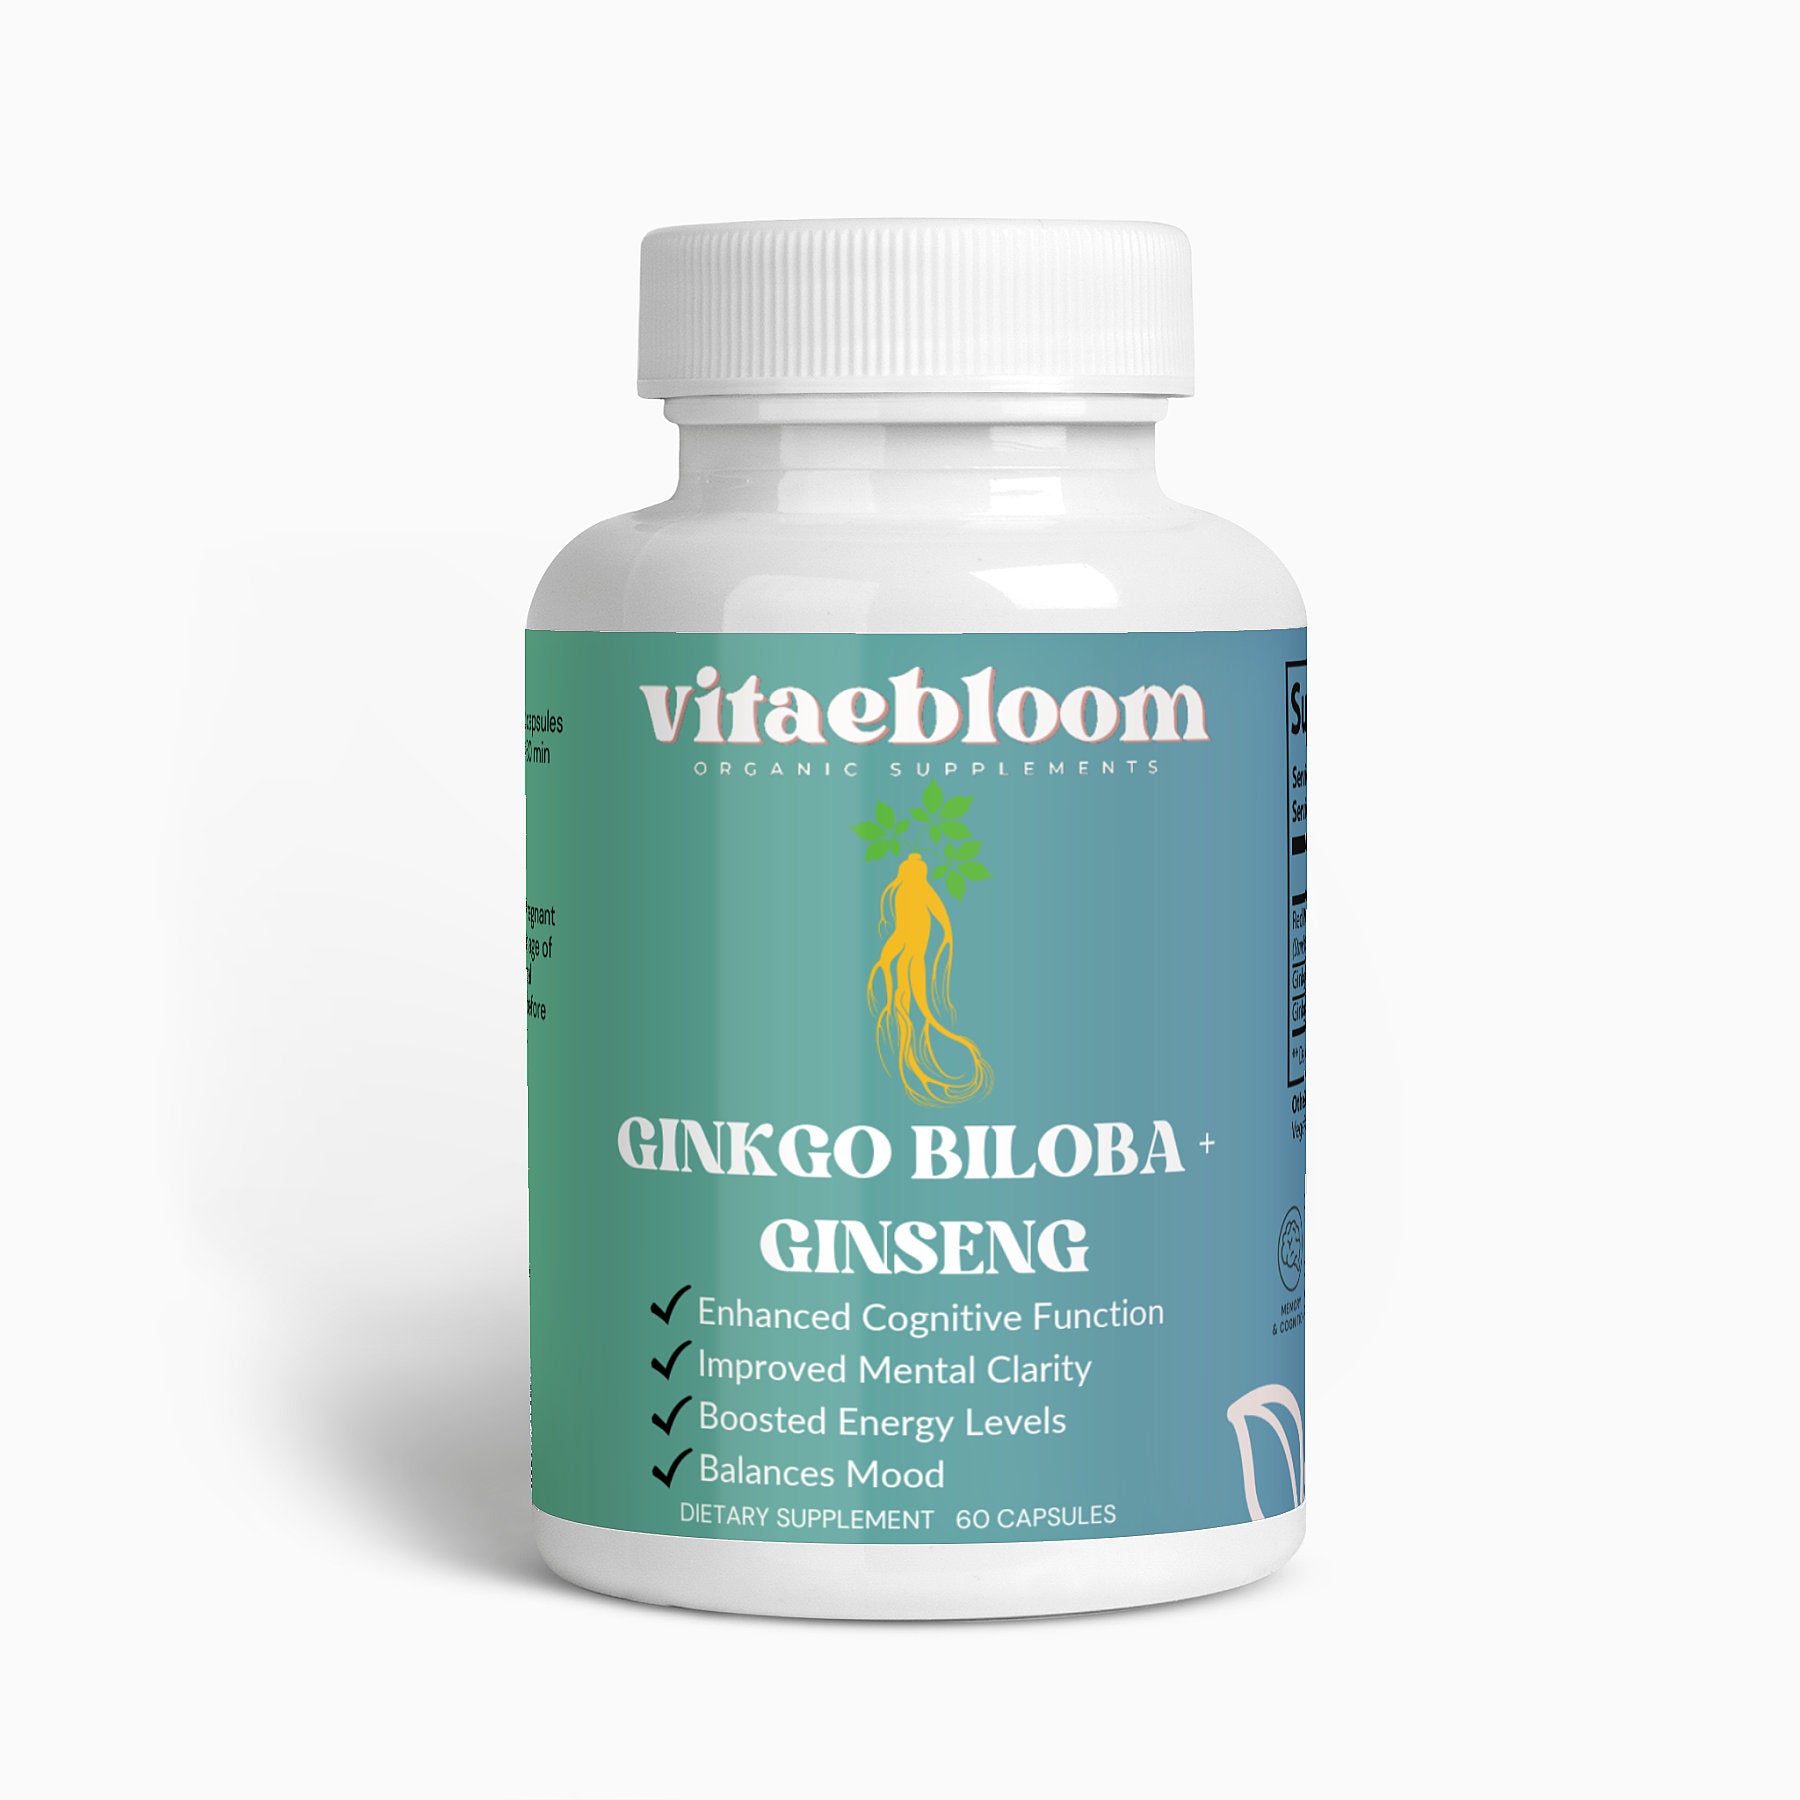 Introducing our exceptional Ginkgo Biloba + Ginseng Capsules, a powerful and synergistic blend of two highly revered natural ingredients designed to boost your cognitive function, energy levels, and overall well-being. These potent capsules combine the benefits of both Ginkgo Biloba and Ginseng to create a holistic supplement that caters to a wide array of health needs. By harnessing the power of these ancient herbs, our capsules are meticulously formulated to deliver optimal re